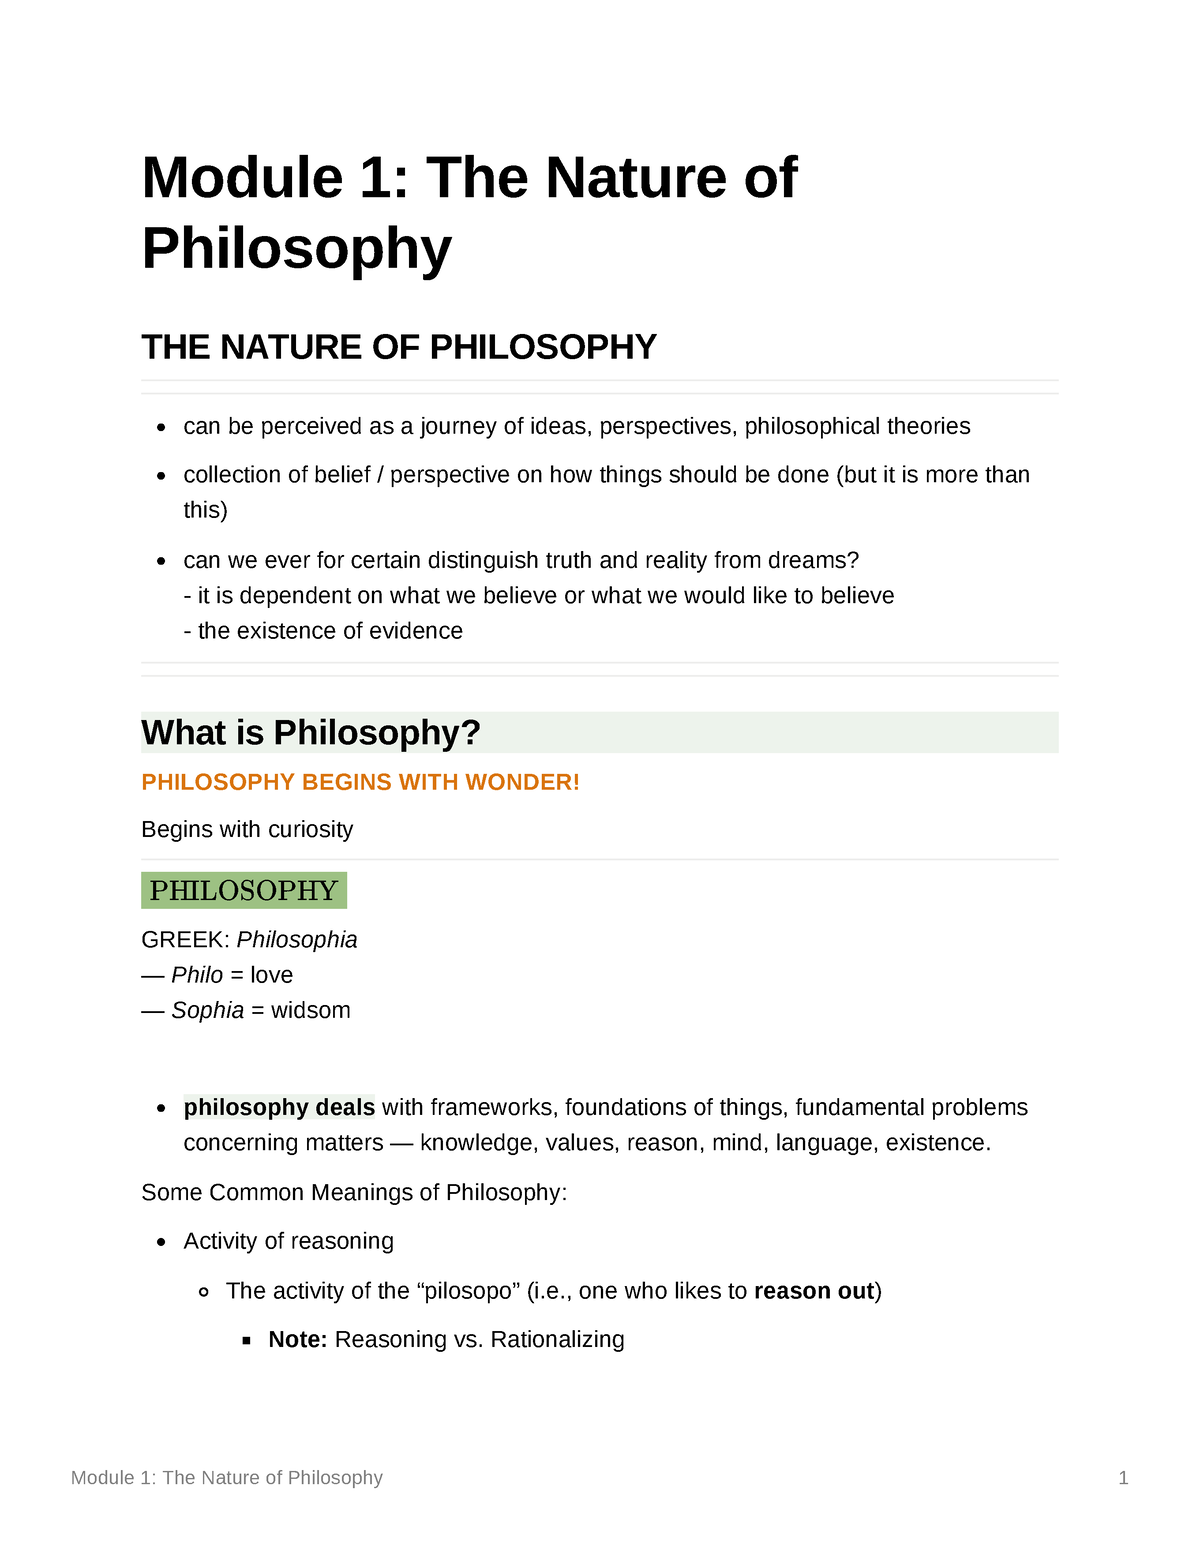 essay of nature of philosophy